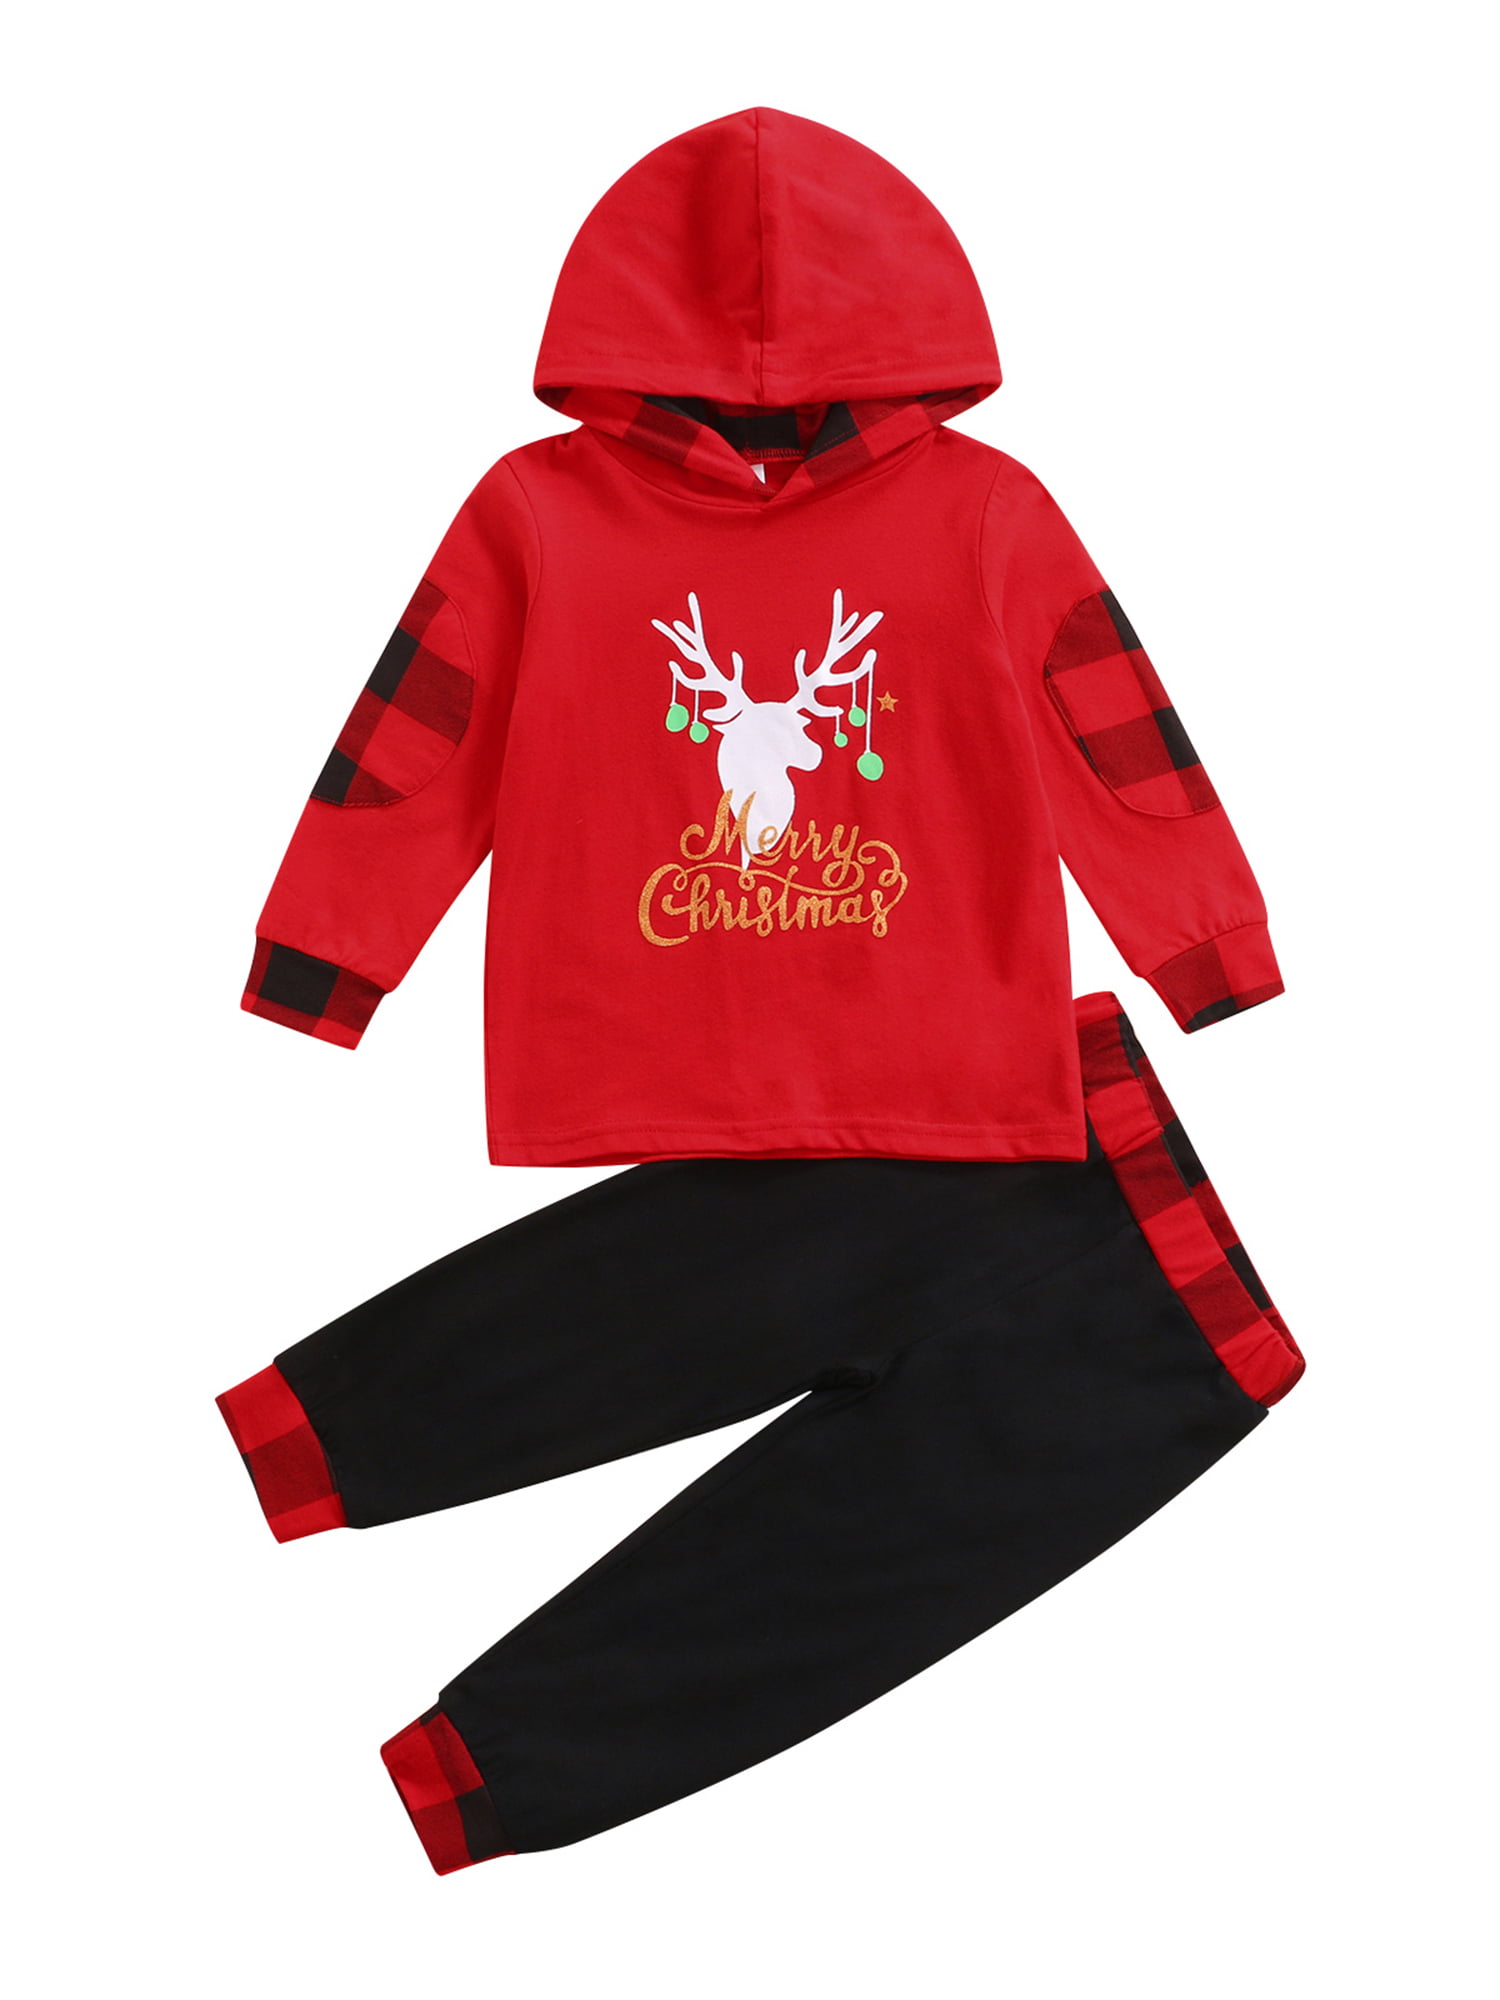 Canrulo Kids Girls Boys Christmas Clothes Set Plaid Print Hooded Tops  Trousers Clothes Red 6-7 Years